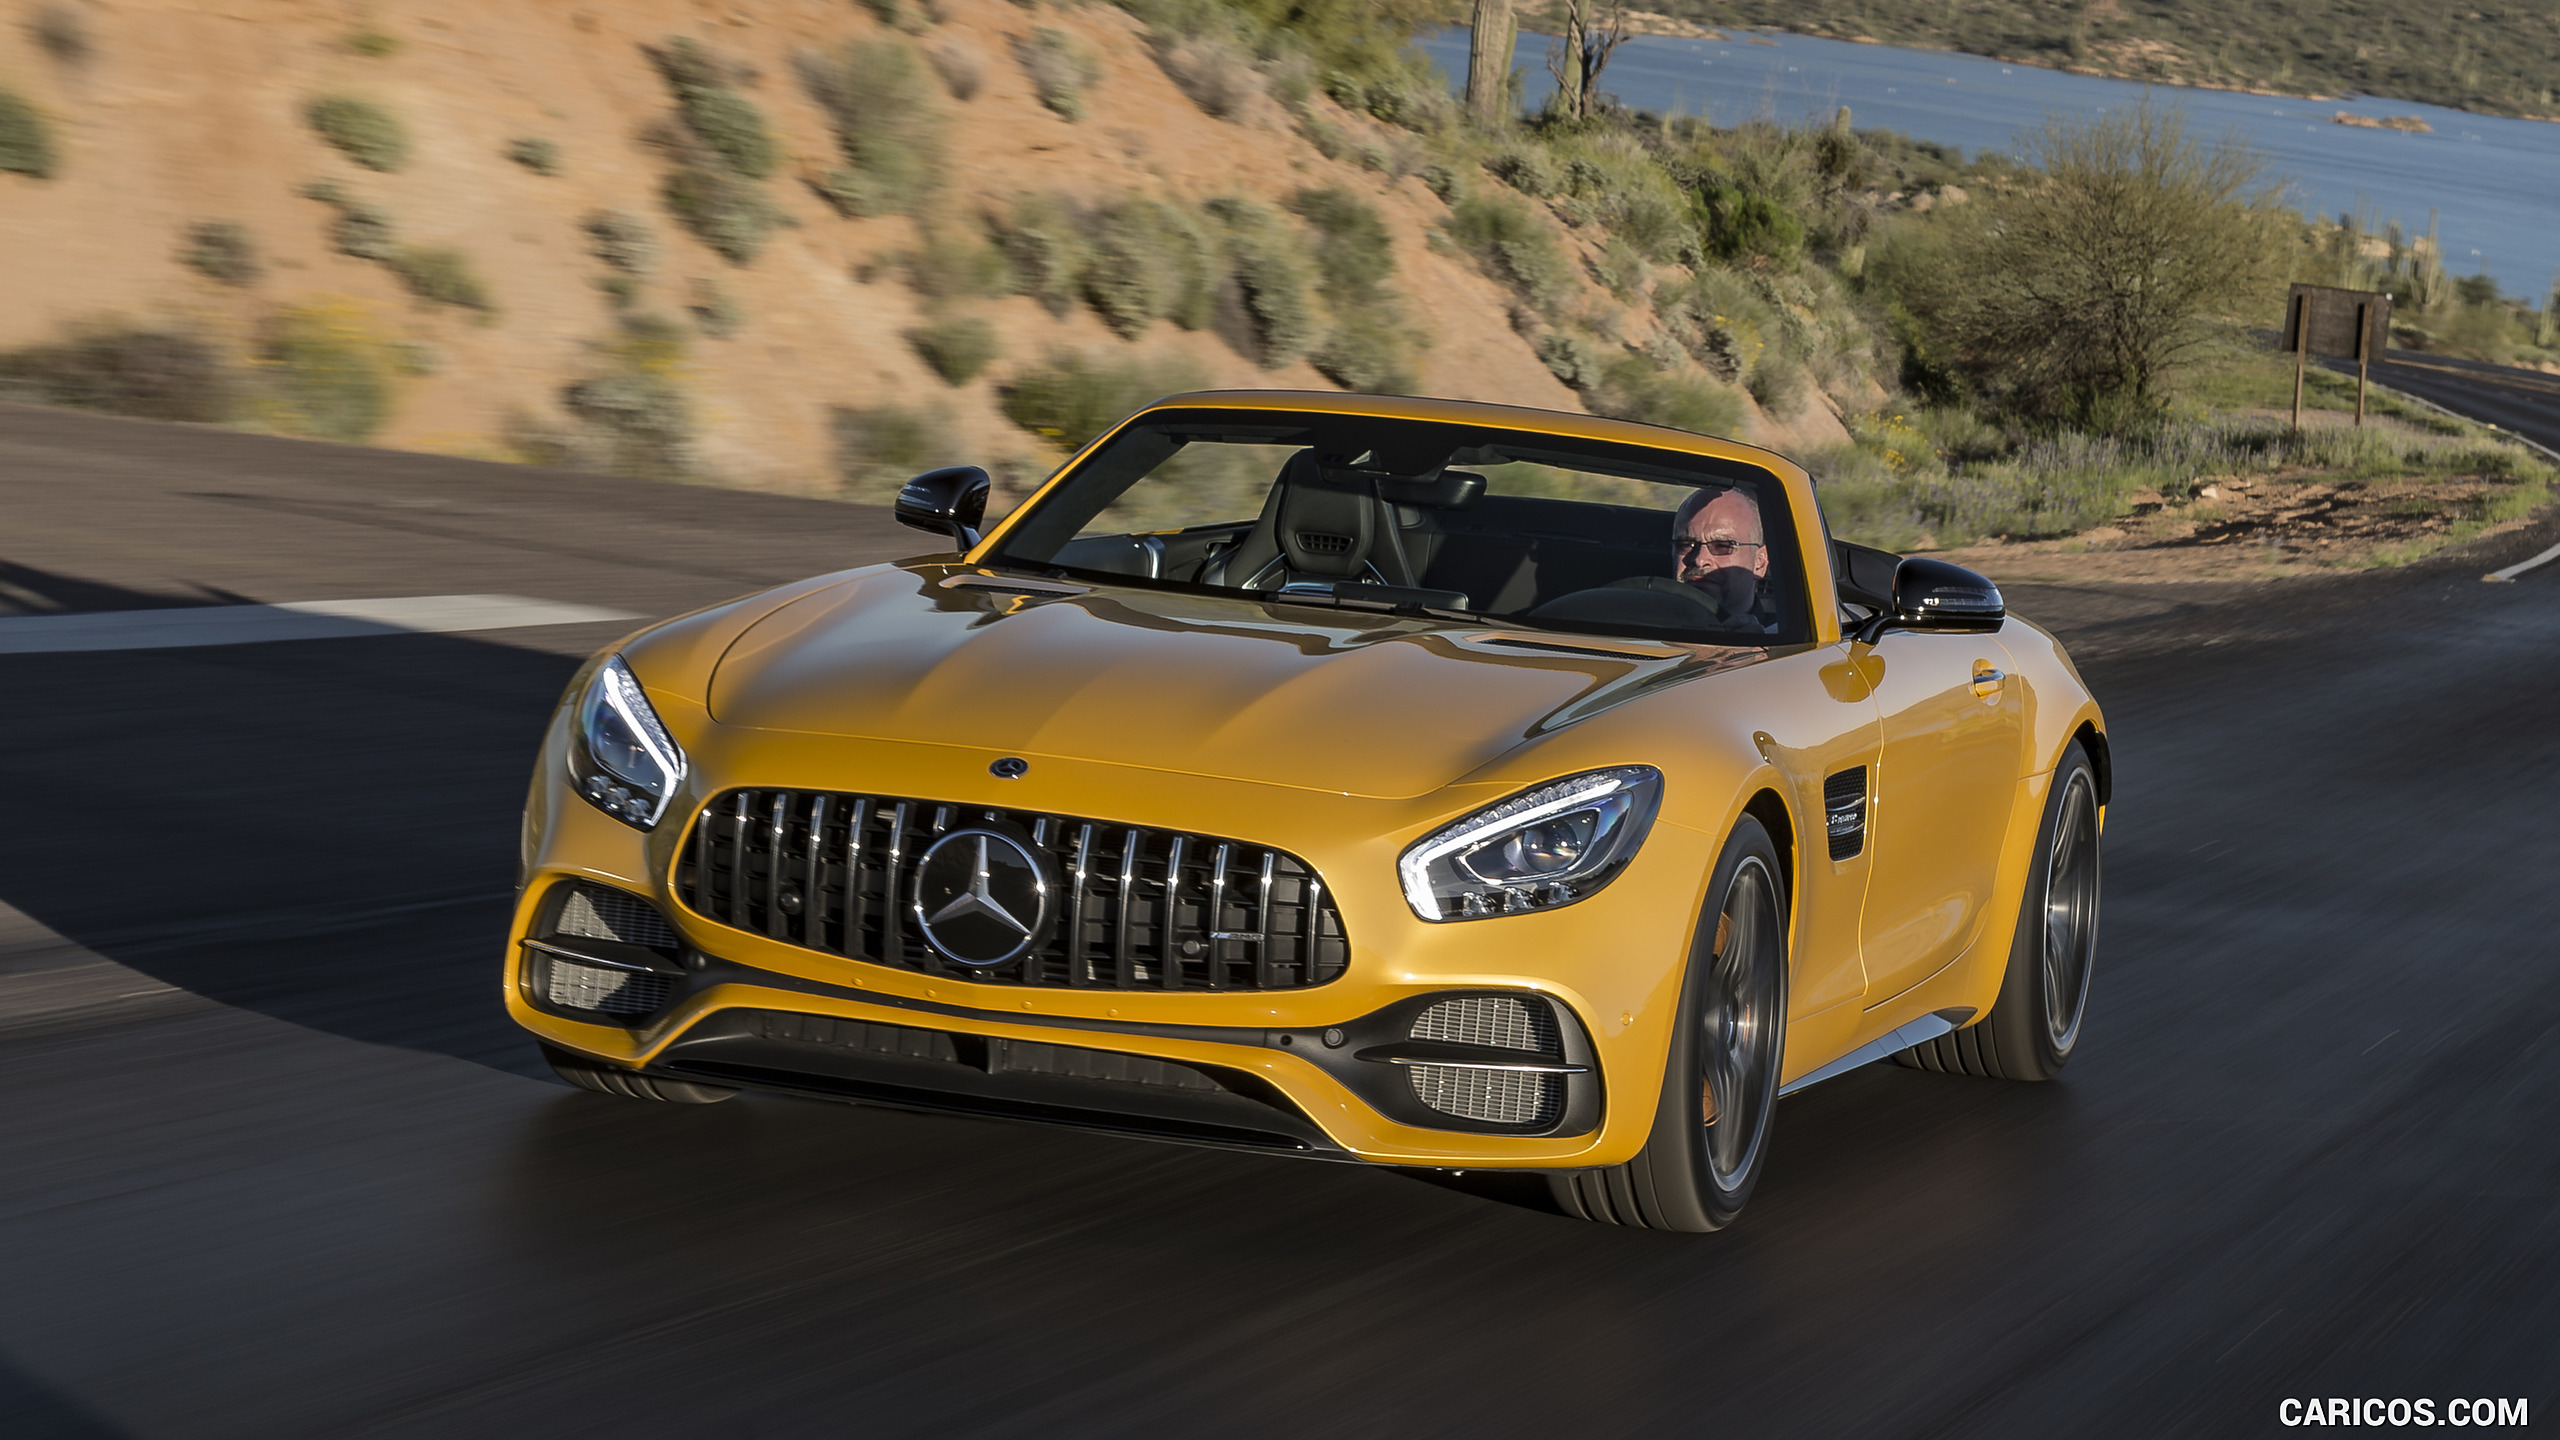 2018 Mercedes-AMG GT C Roadster - Front Three-Quarter, #225 of 350